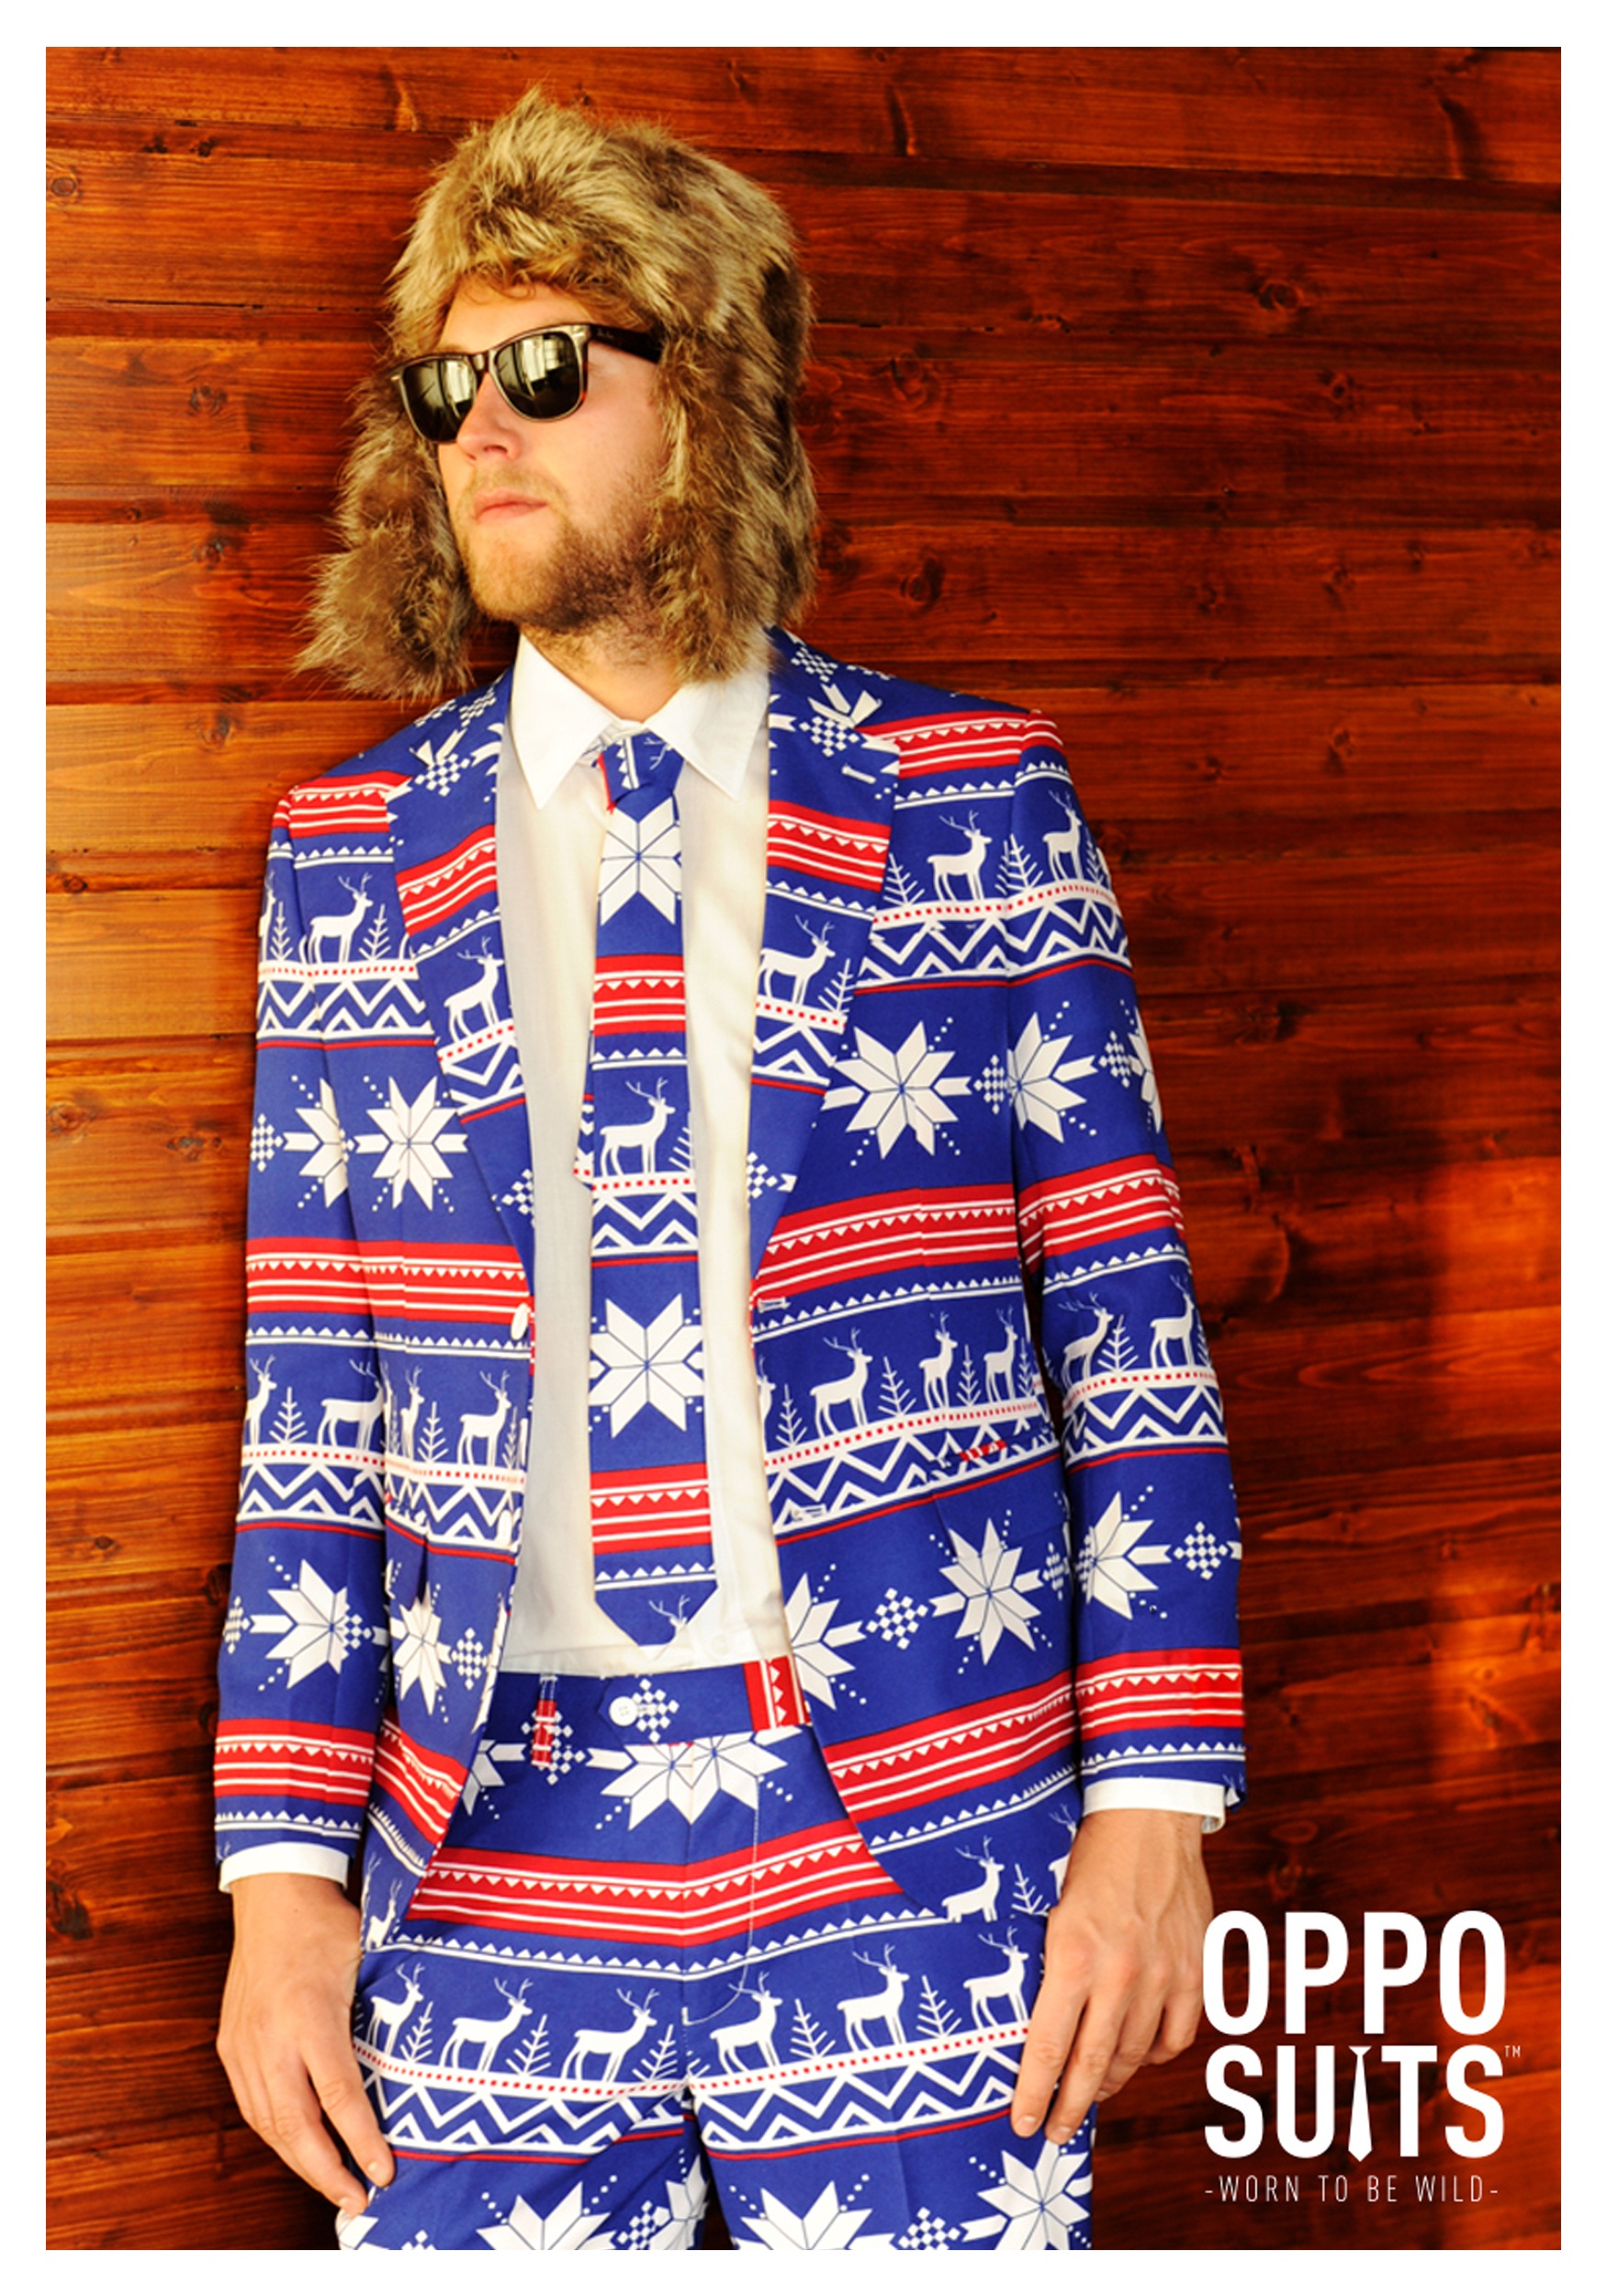 The Rudolph OppoSuits Fun Ugly Christmas Suits For Men Full Suit: Jacket Pants & Tie Abito da uomo Uomo 